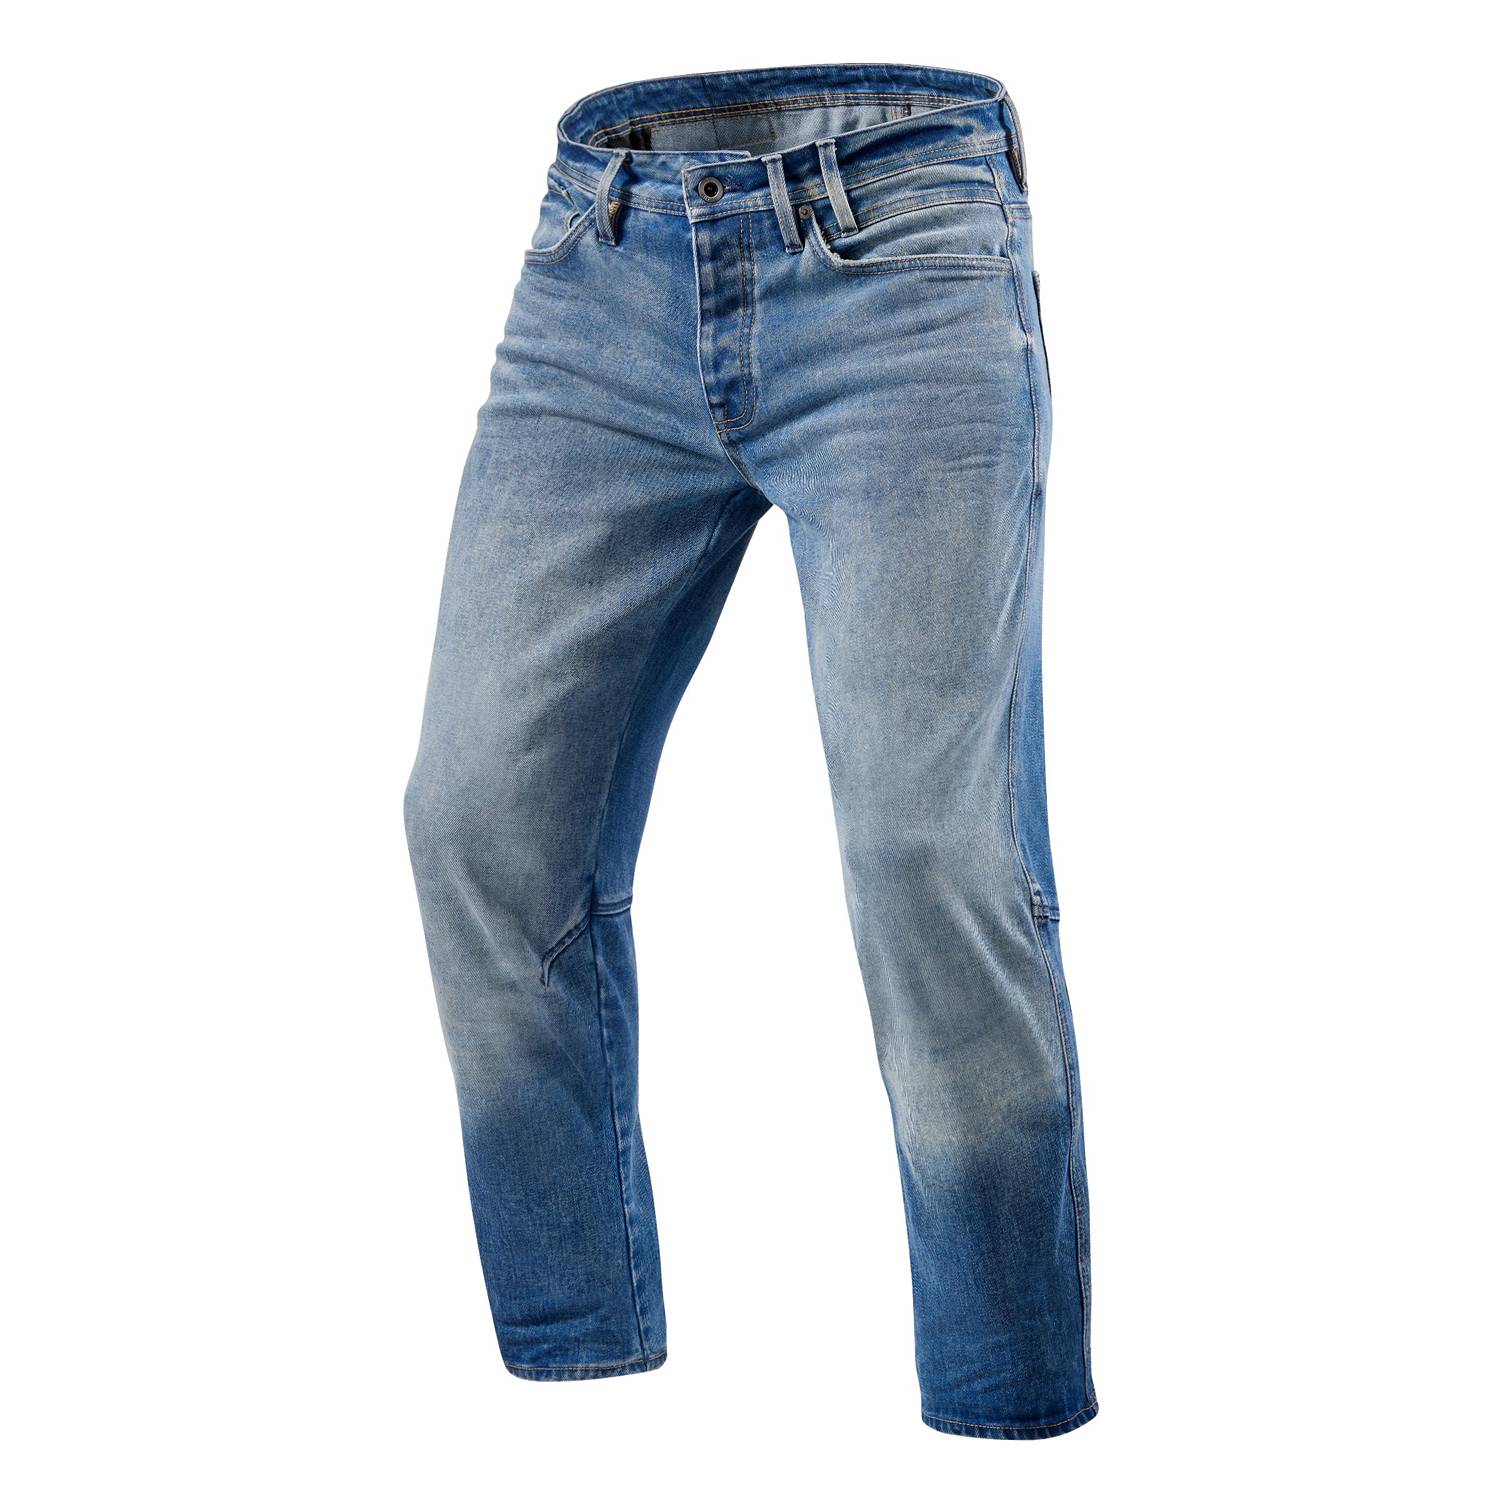 Image of EU REV'IT! Salt TF Mid Blue Used Motorcycle Jeans Taille L32/W30